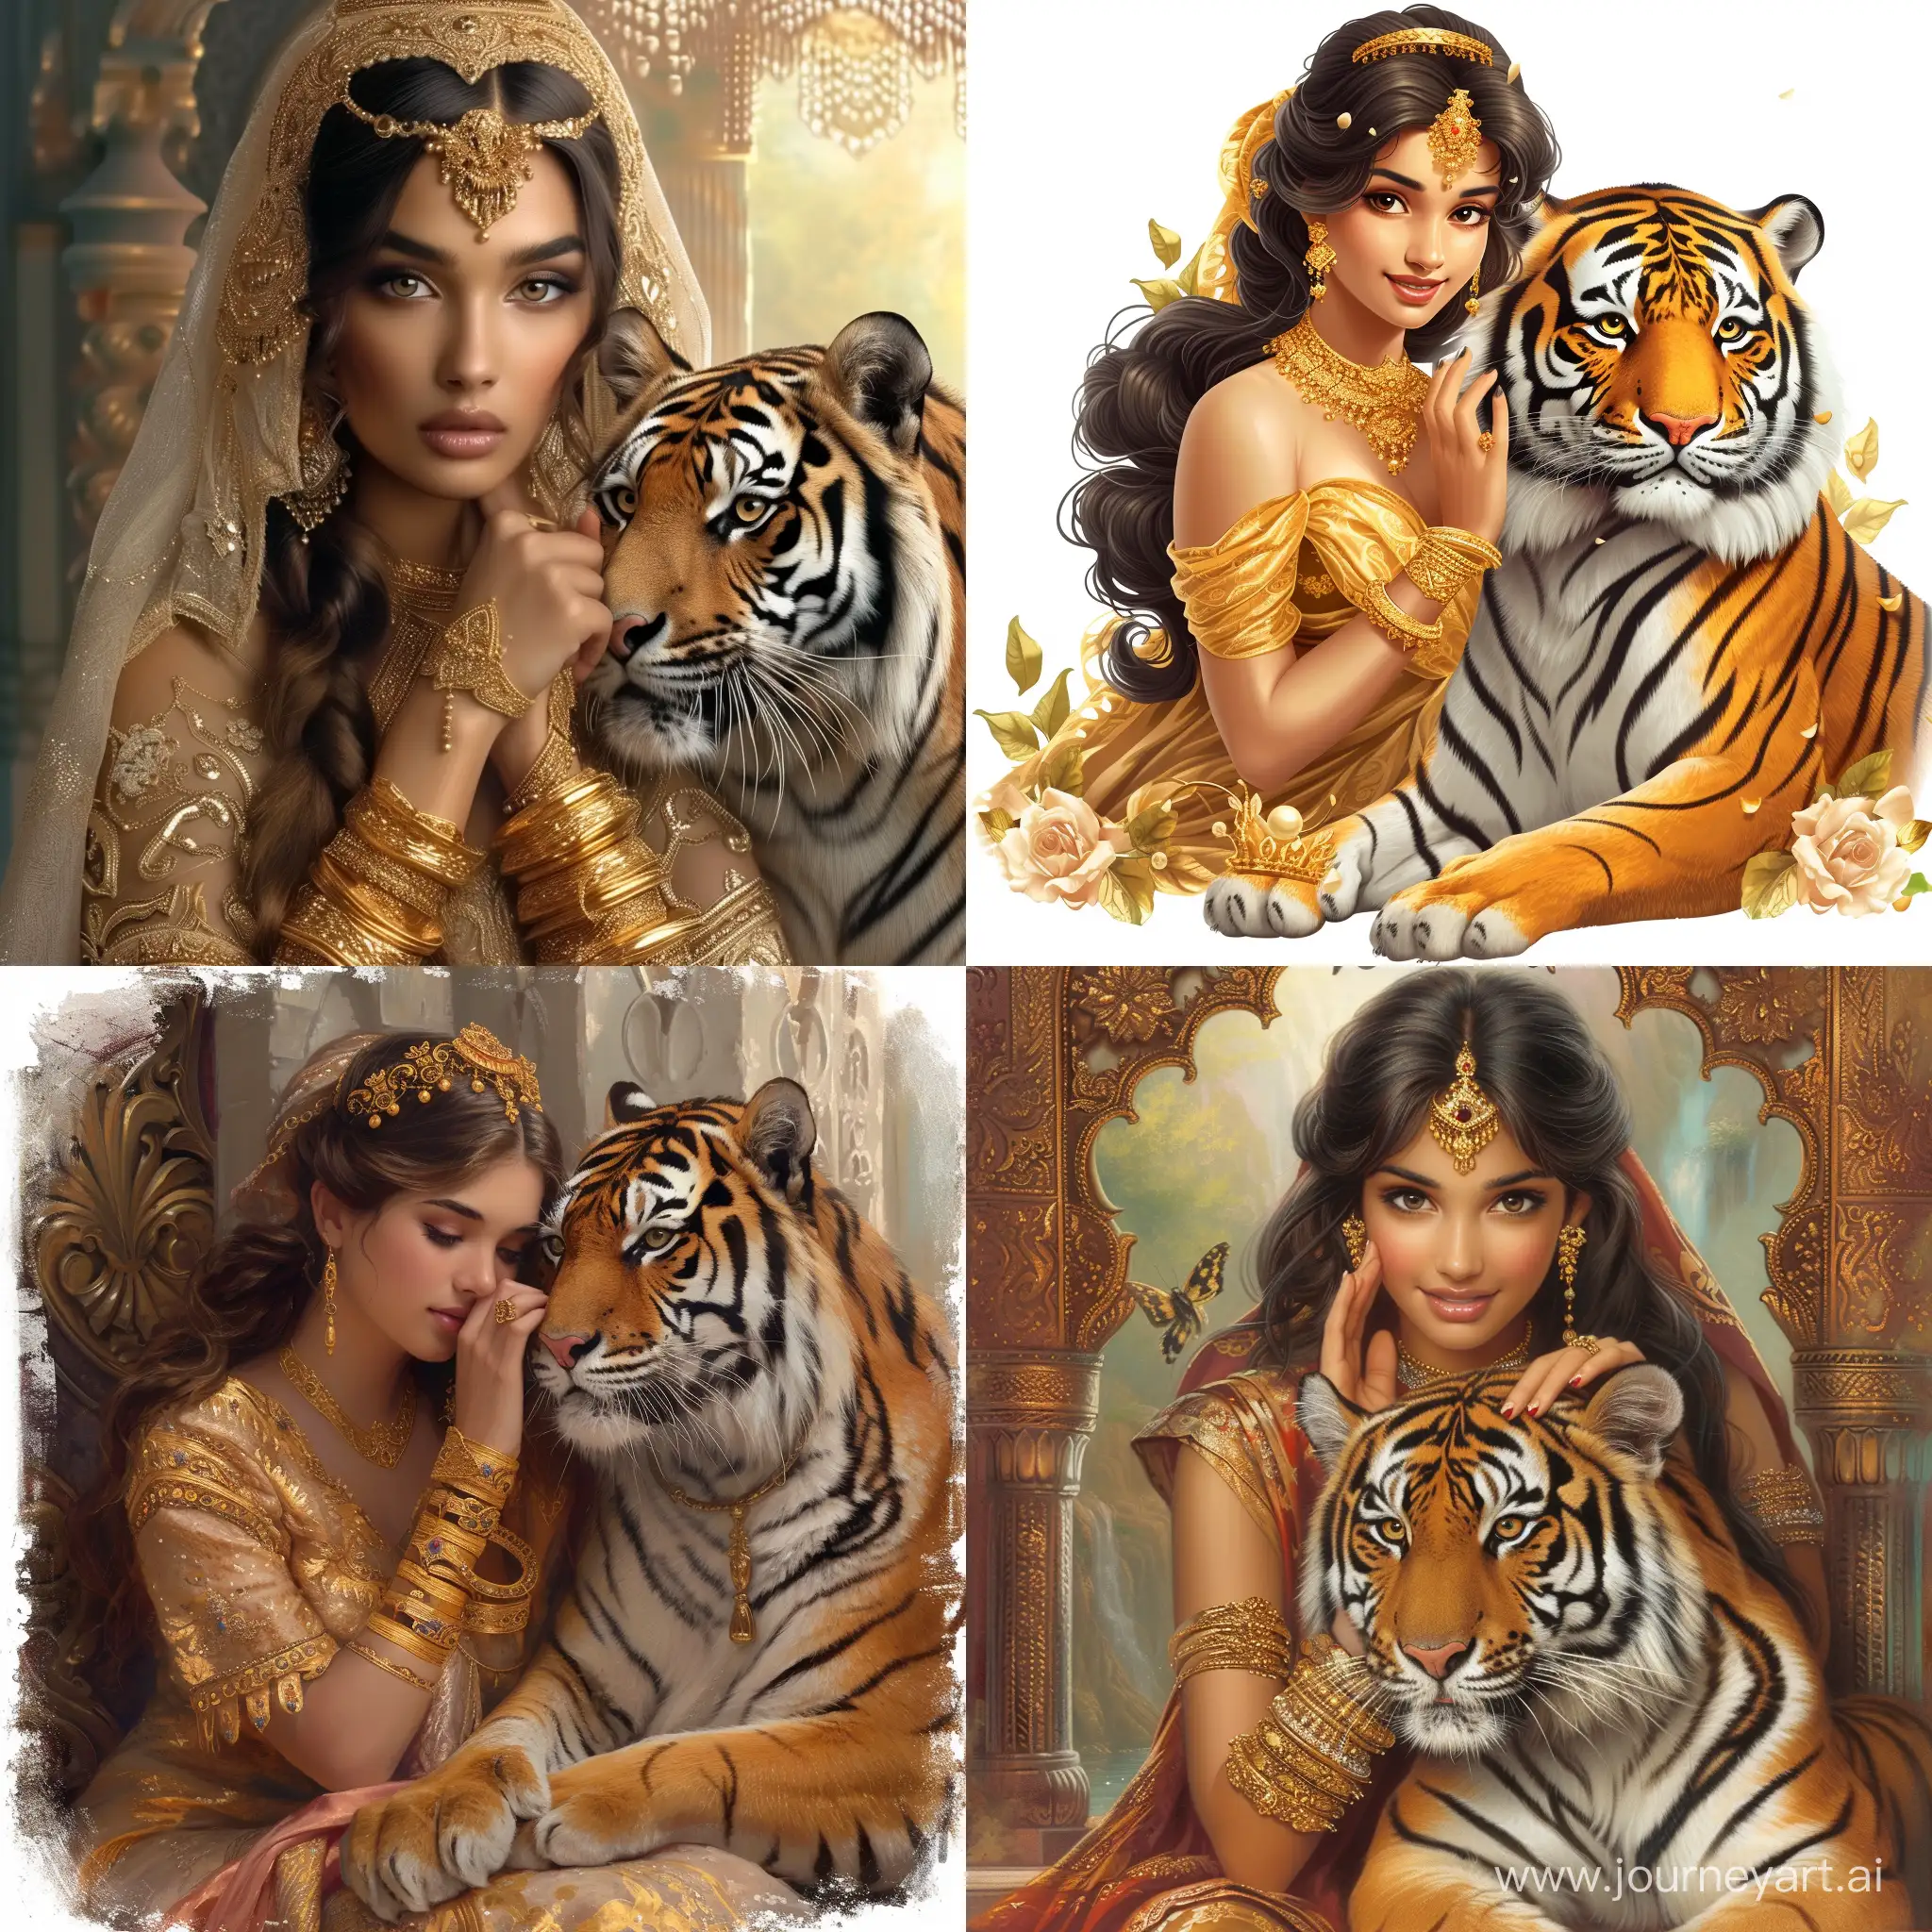 Beautiful princess with gold accessories with her tiger